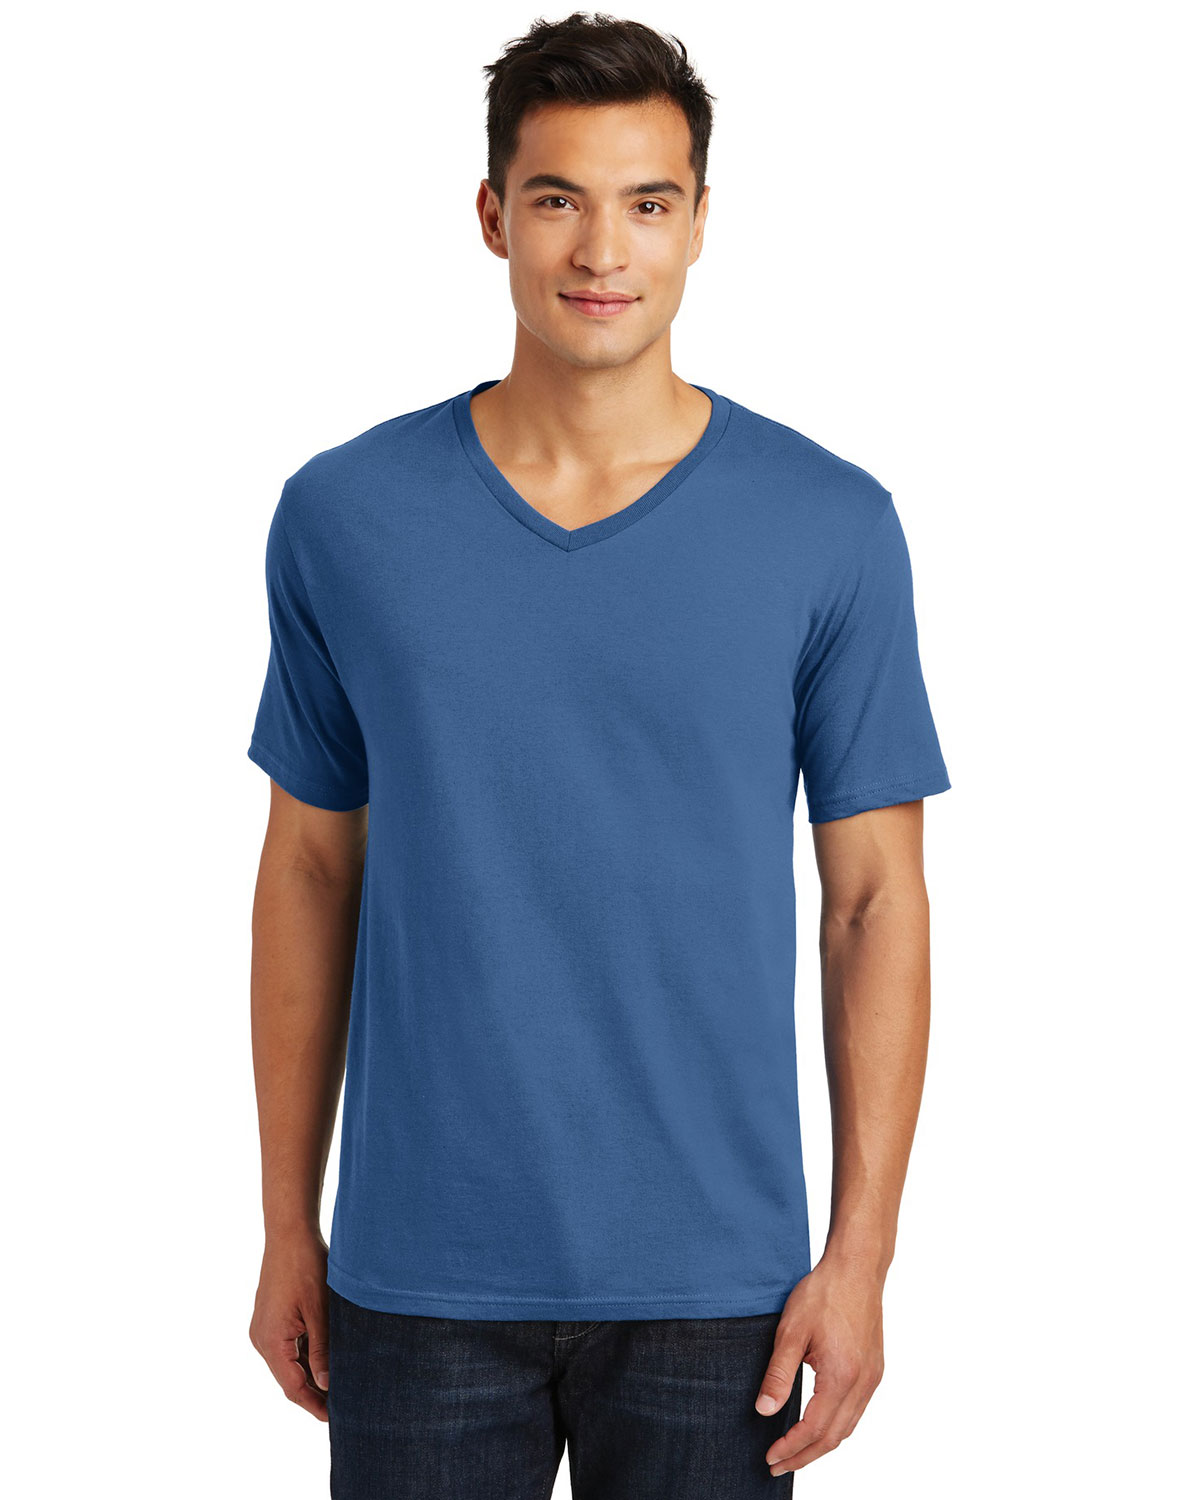 District Made DT1170 Men Perfect Weight V-Neck Tee at Apparelstation